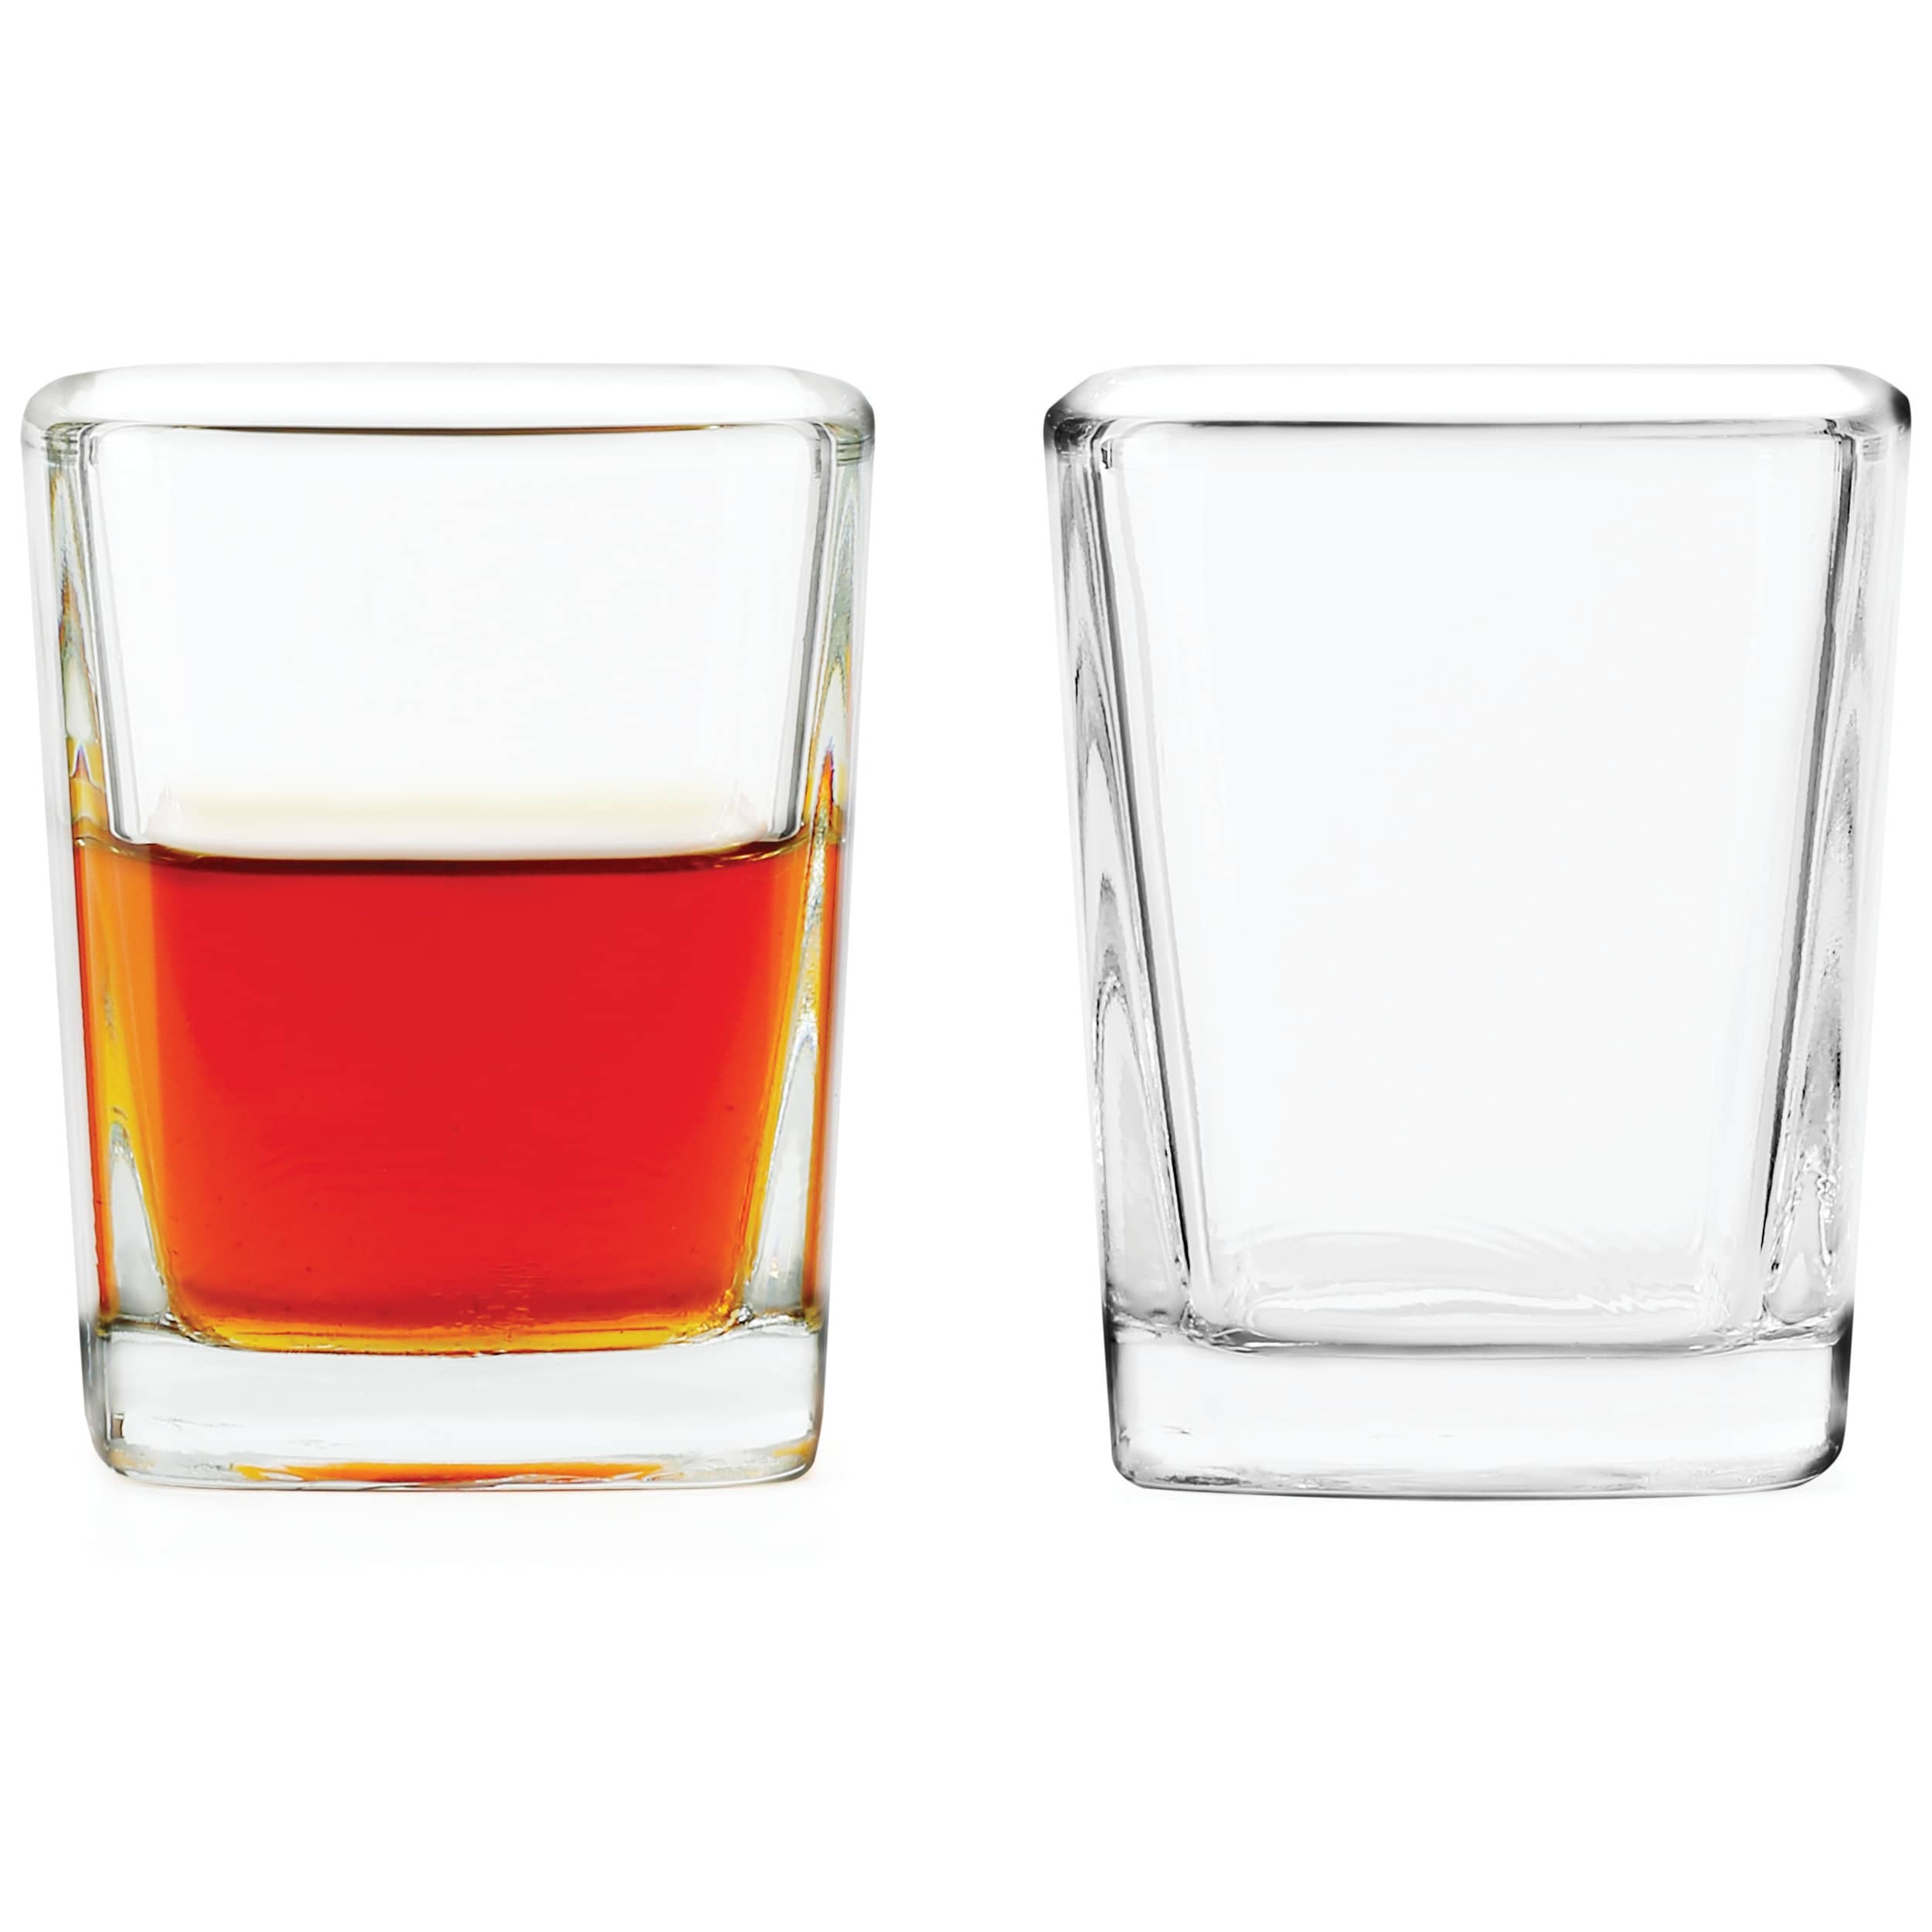 Circleware Simply Everyday Square Shot Glasses Set of 6 2.3oz - On Sale -  Bed Bath & Beyond - 34939493